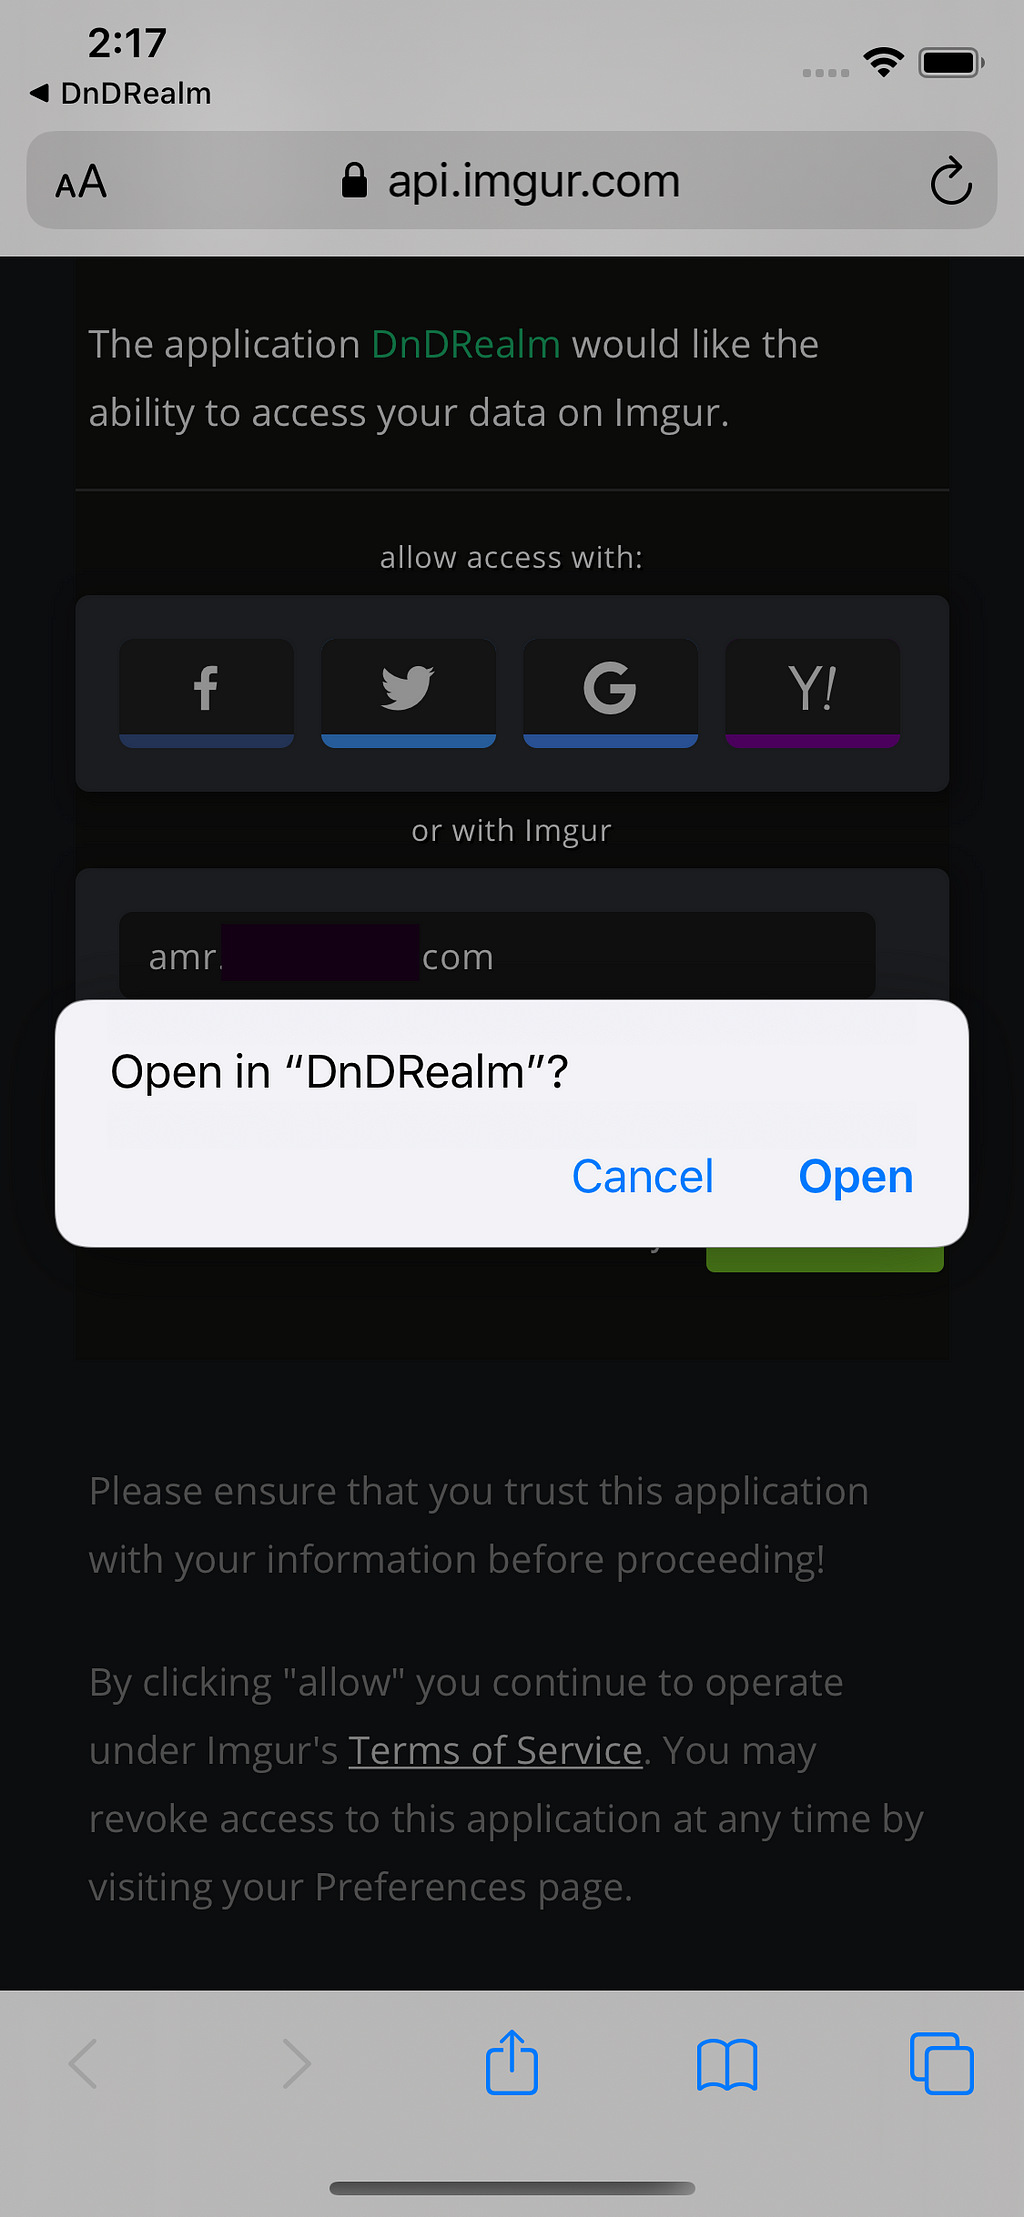 Safari with the Imgur login screen, showing an alert to Open in DnDRealm